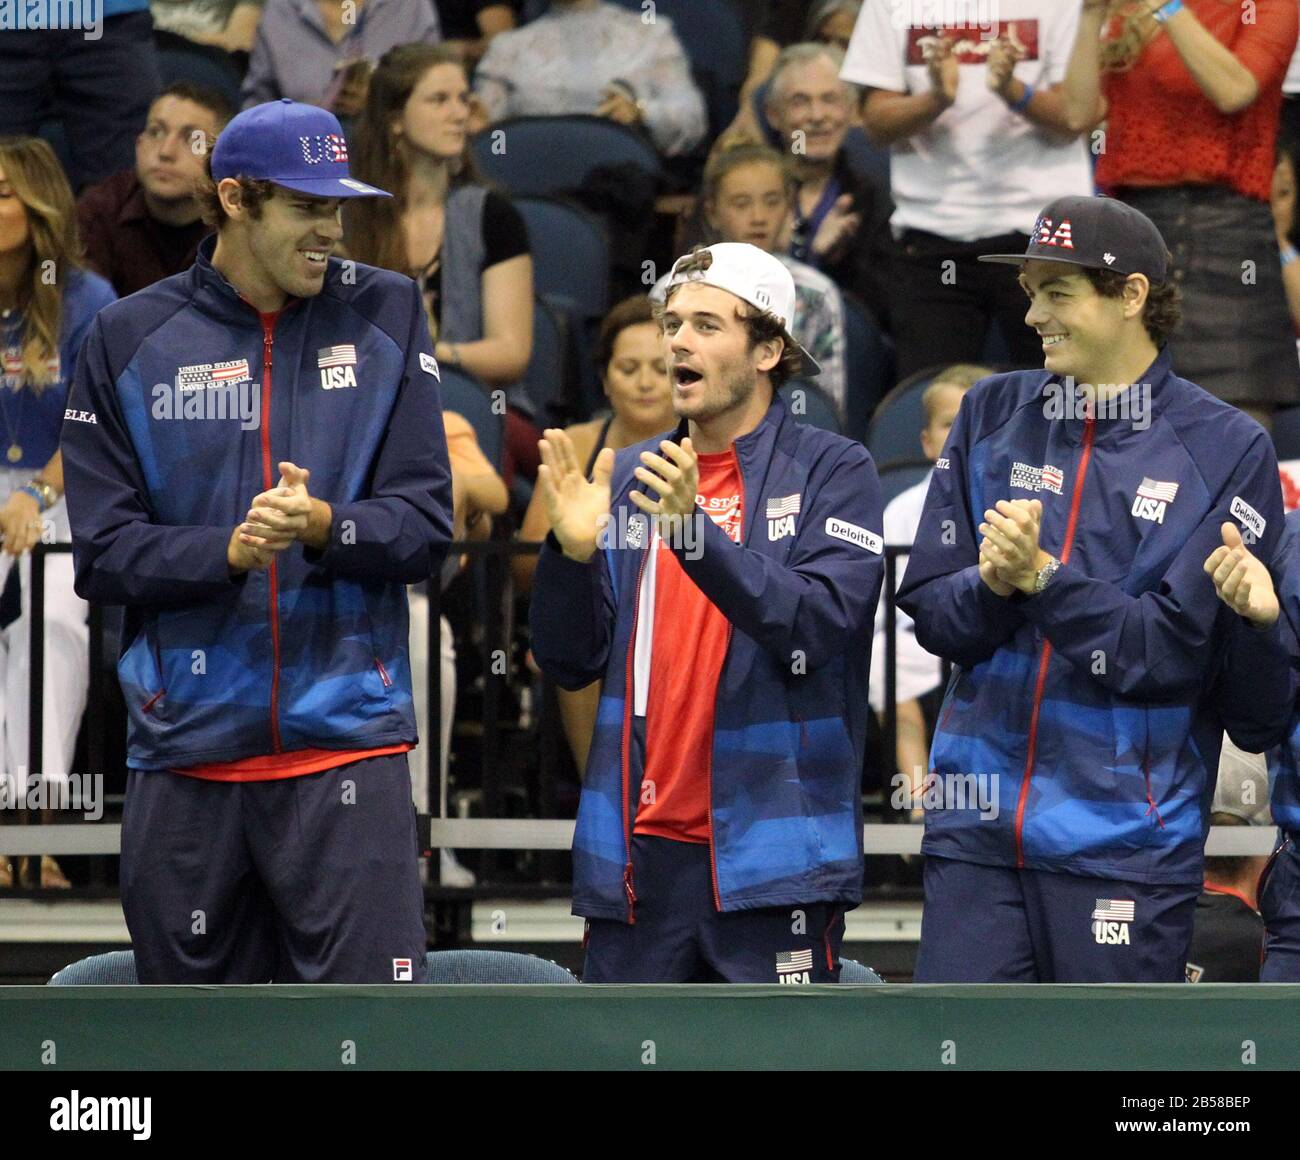 March 7, 2020 - Reilly Opelka (USA), Taylor Fritz (USA) and Tommy Paul  (USA) during a Davis Cup by Rakuten Qualifier doubles match between Sanjar  Fayziev (UZB)/Denis Istomin (UZB) and Bob Bryan (